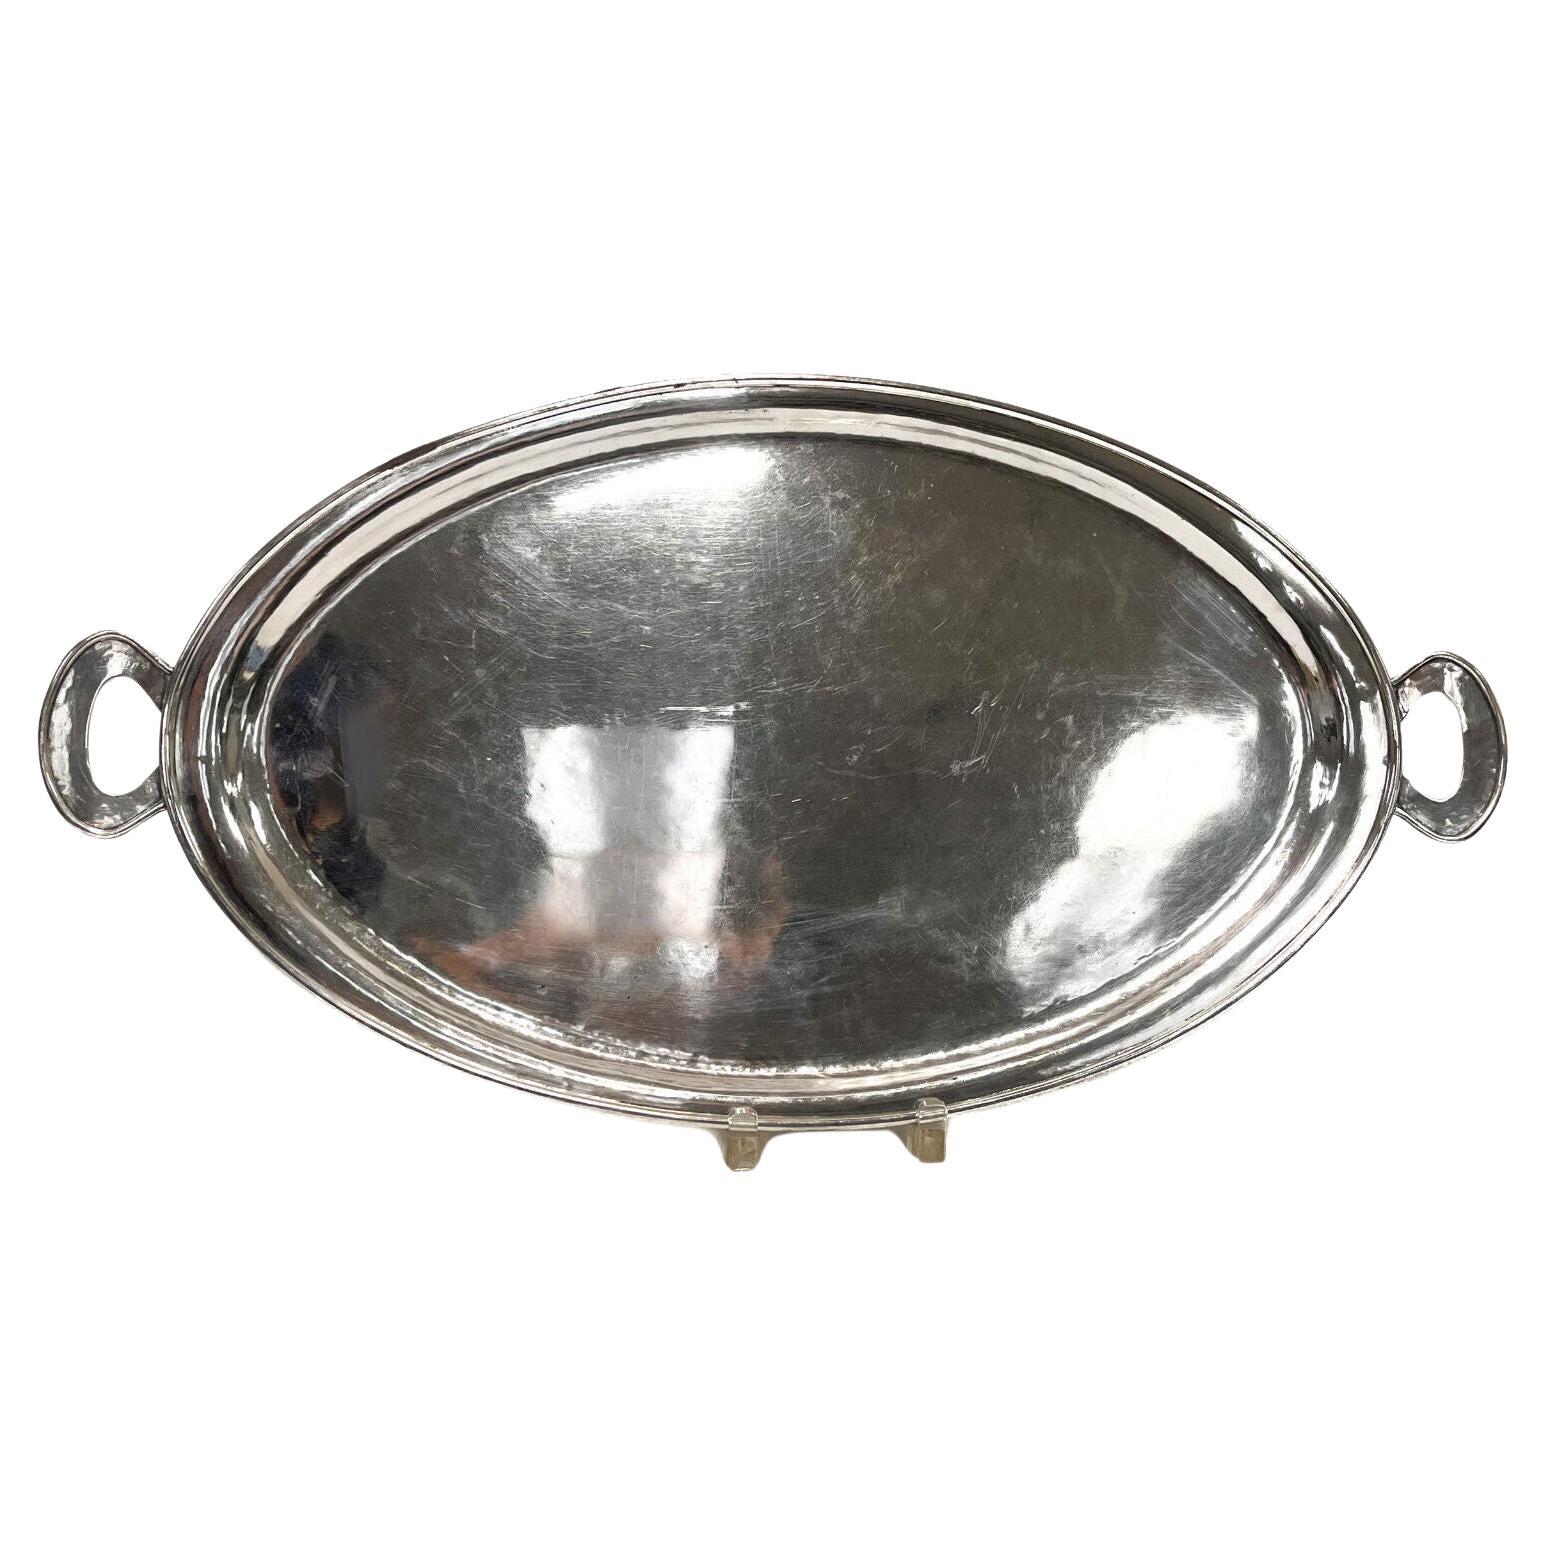  The Kalo Shops Sterling Silver Hand Wrought Handled Oval Serving Tray #208 c191 For Sale